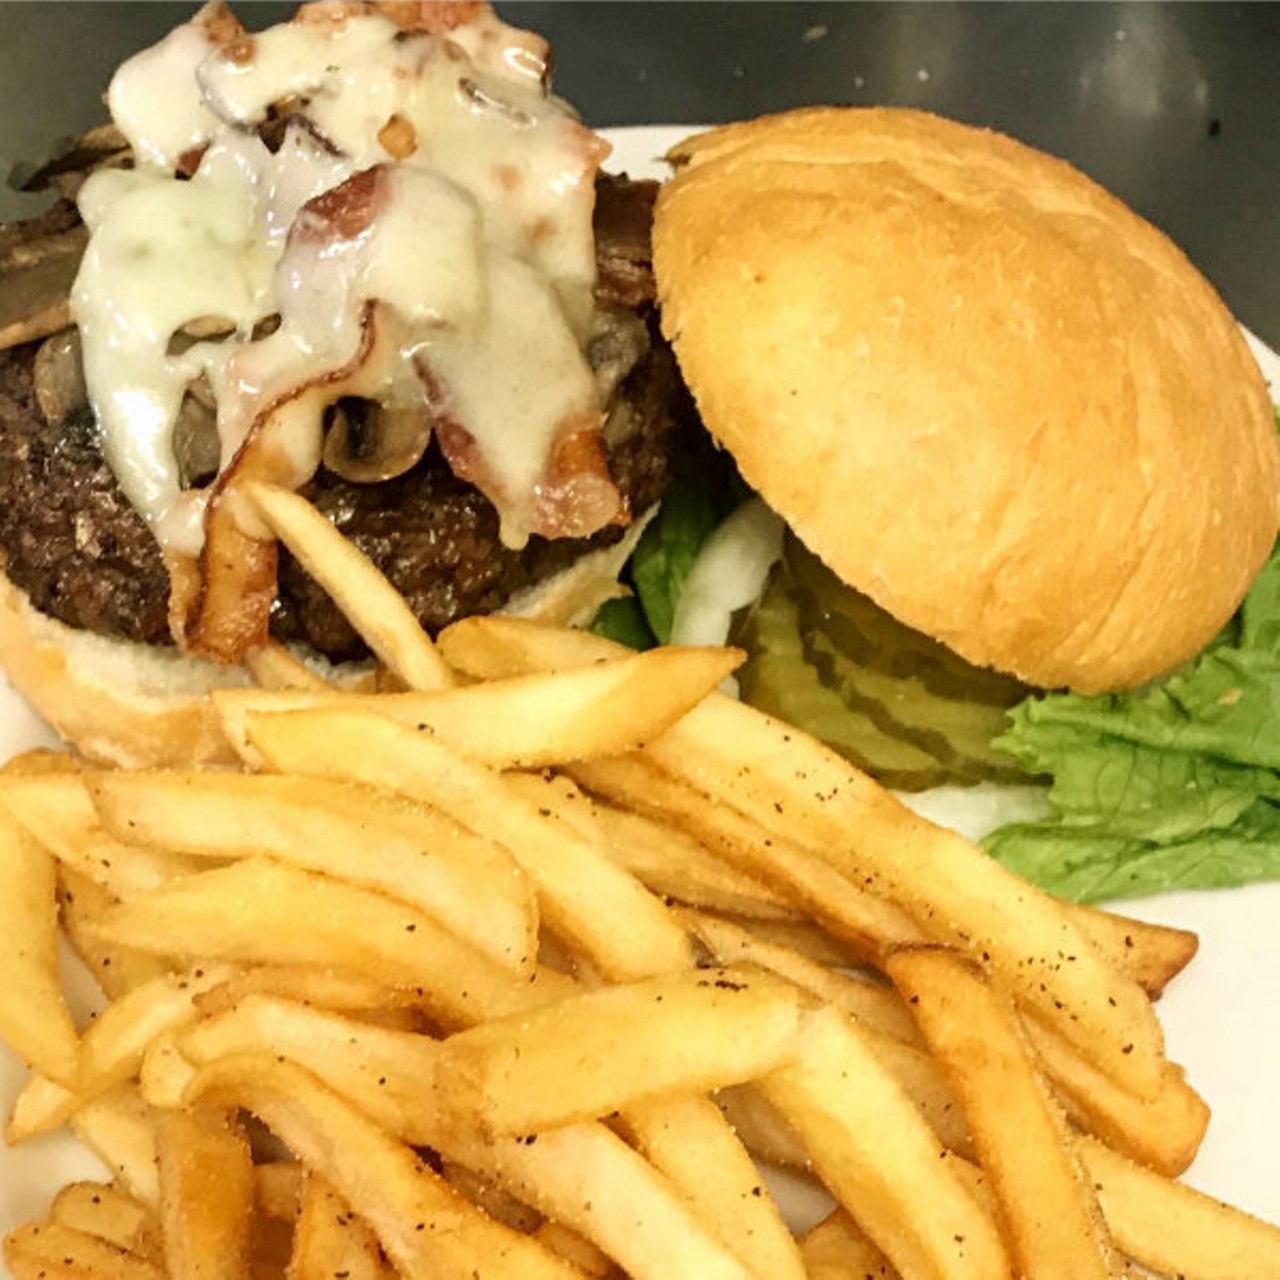 The Concord Grill
(11427 Concord Village Avenue; 314-849-5239)
Jim White Burger: 6 oz. burger with saut&eacute;ed mushroom, bacon and Swiss cheese. Served with seasoned fries.